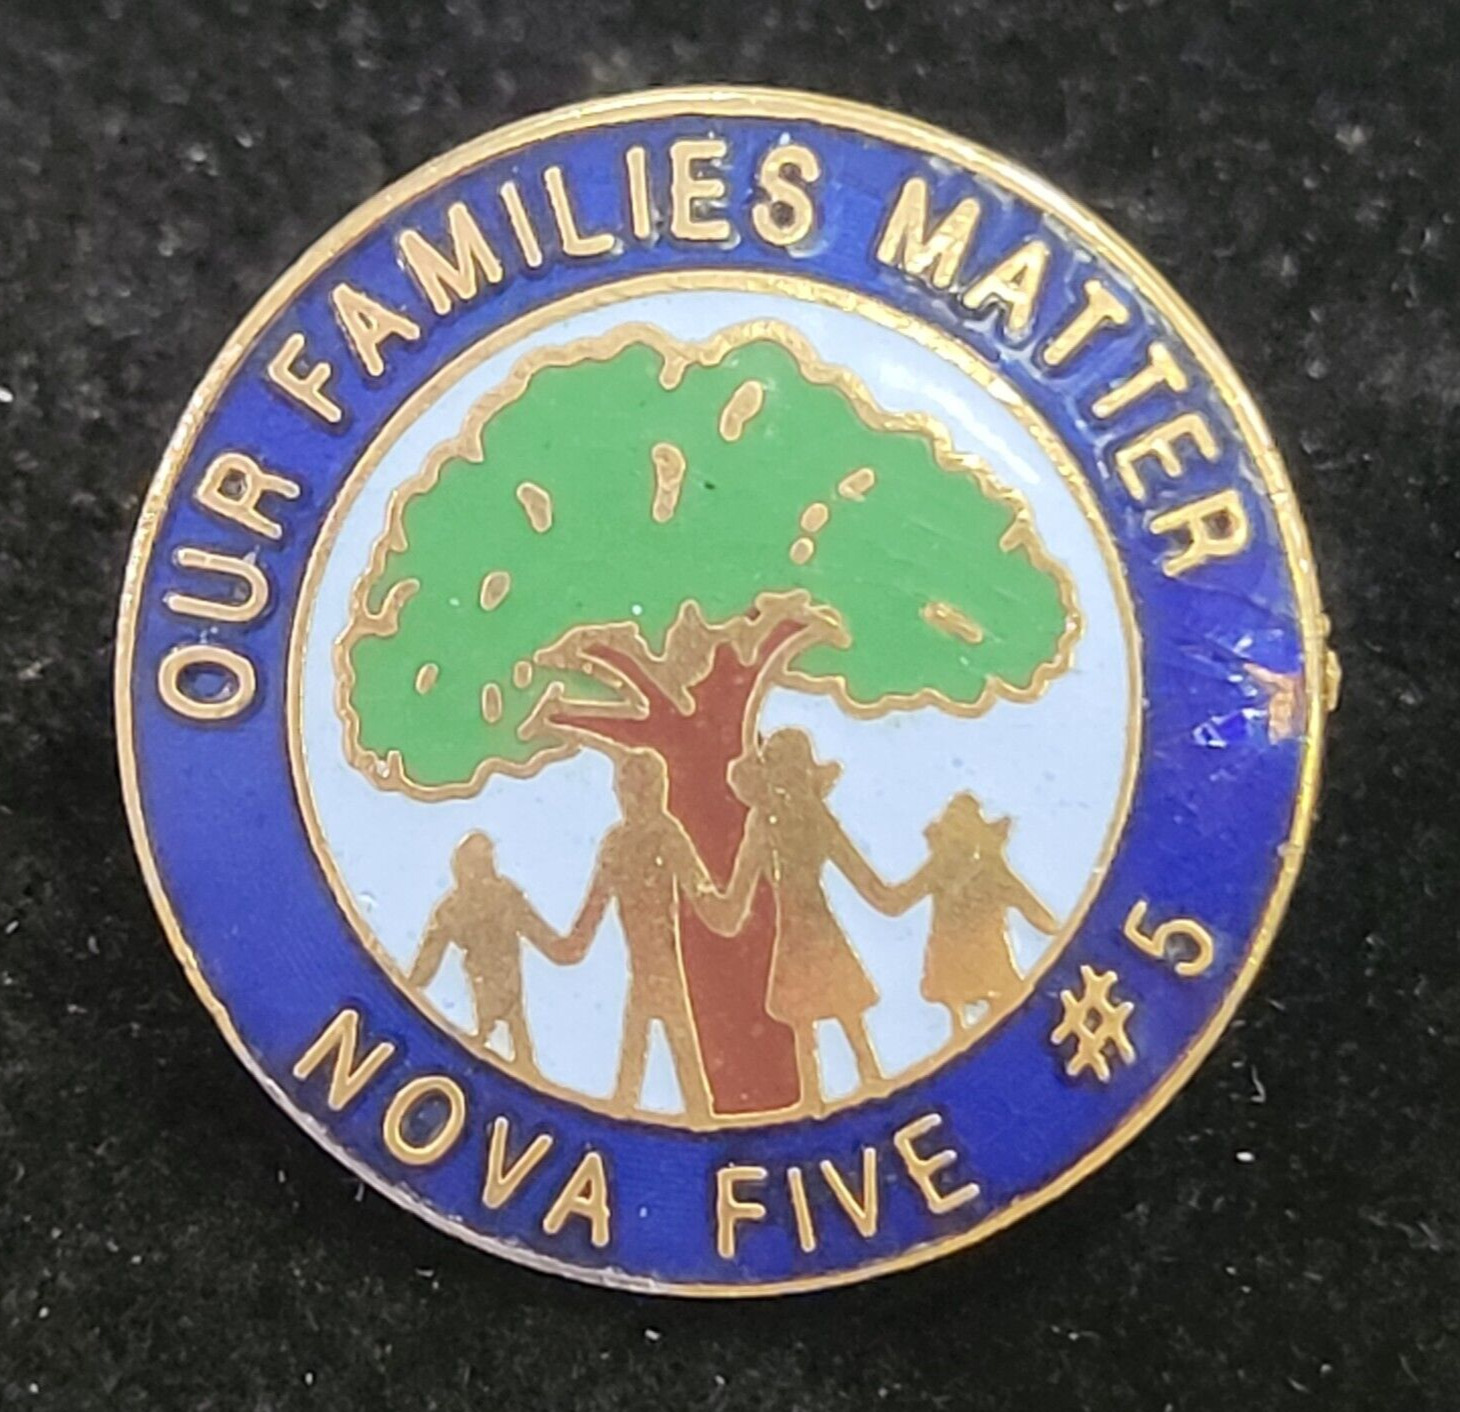 Our Families Matter Nova Five #5 Telephone Pioneers of America Gold Lapel Pin